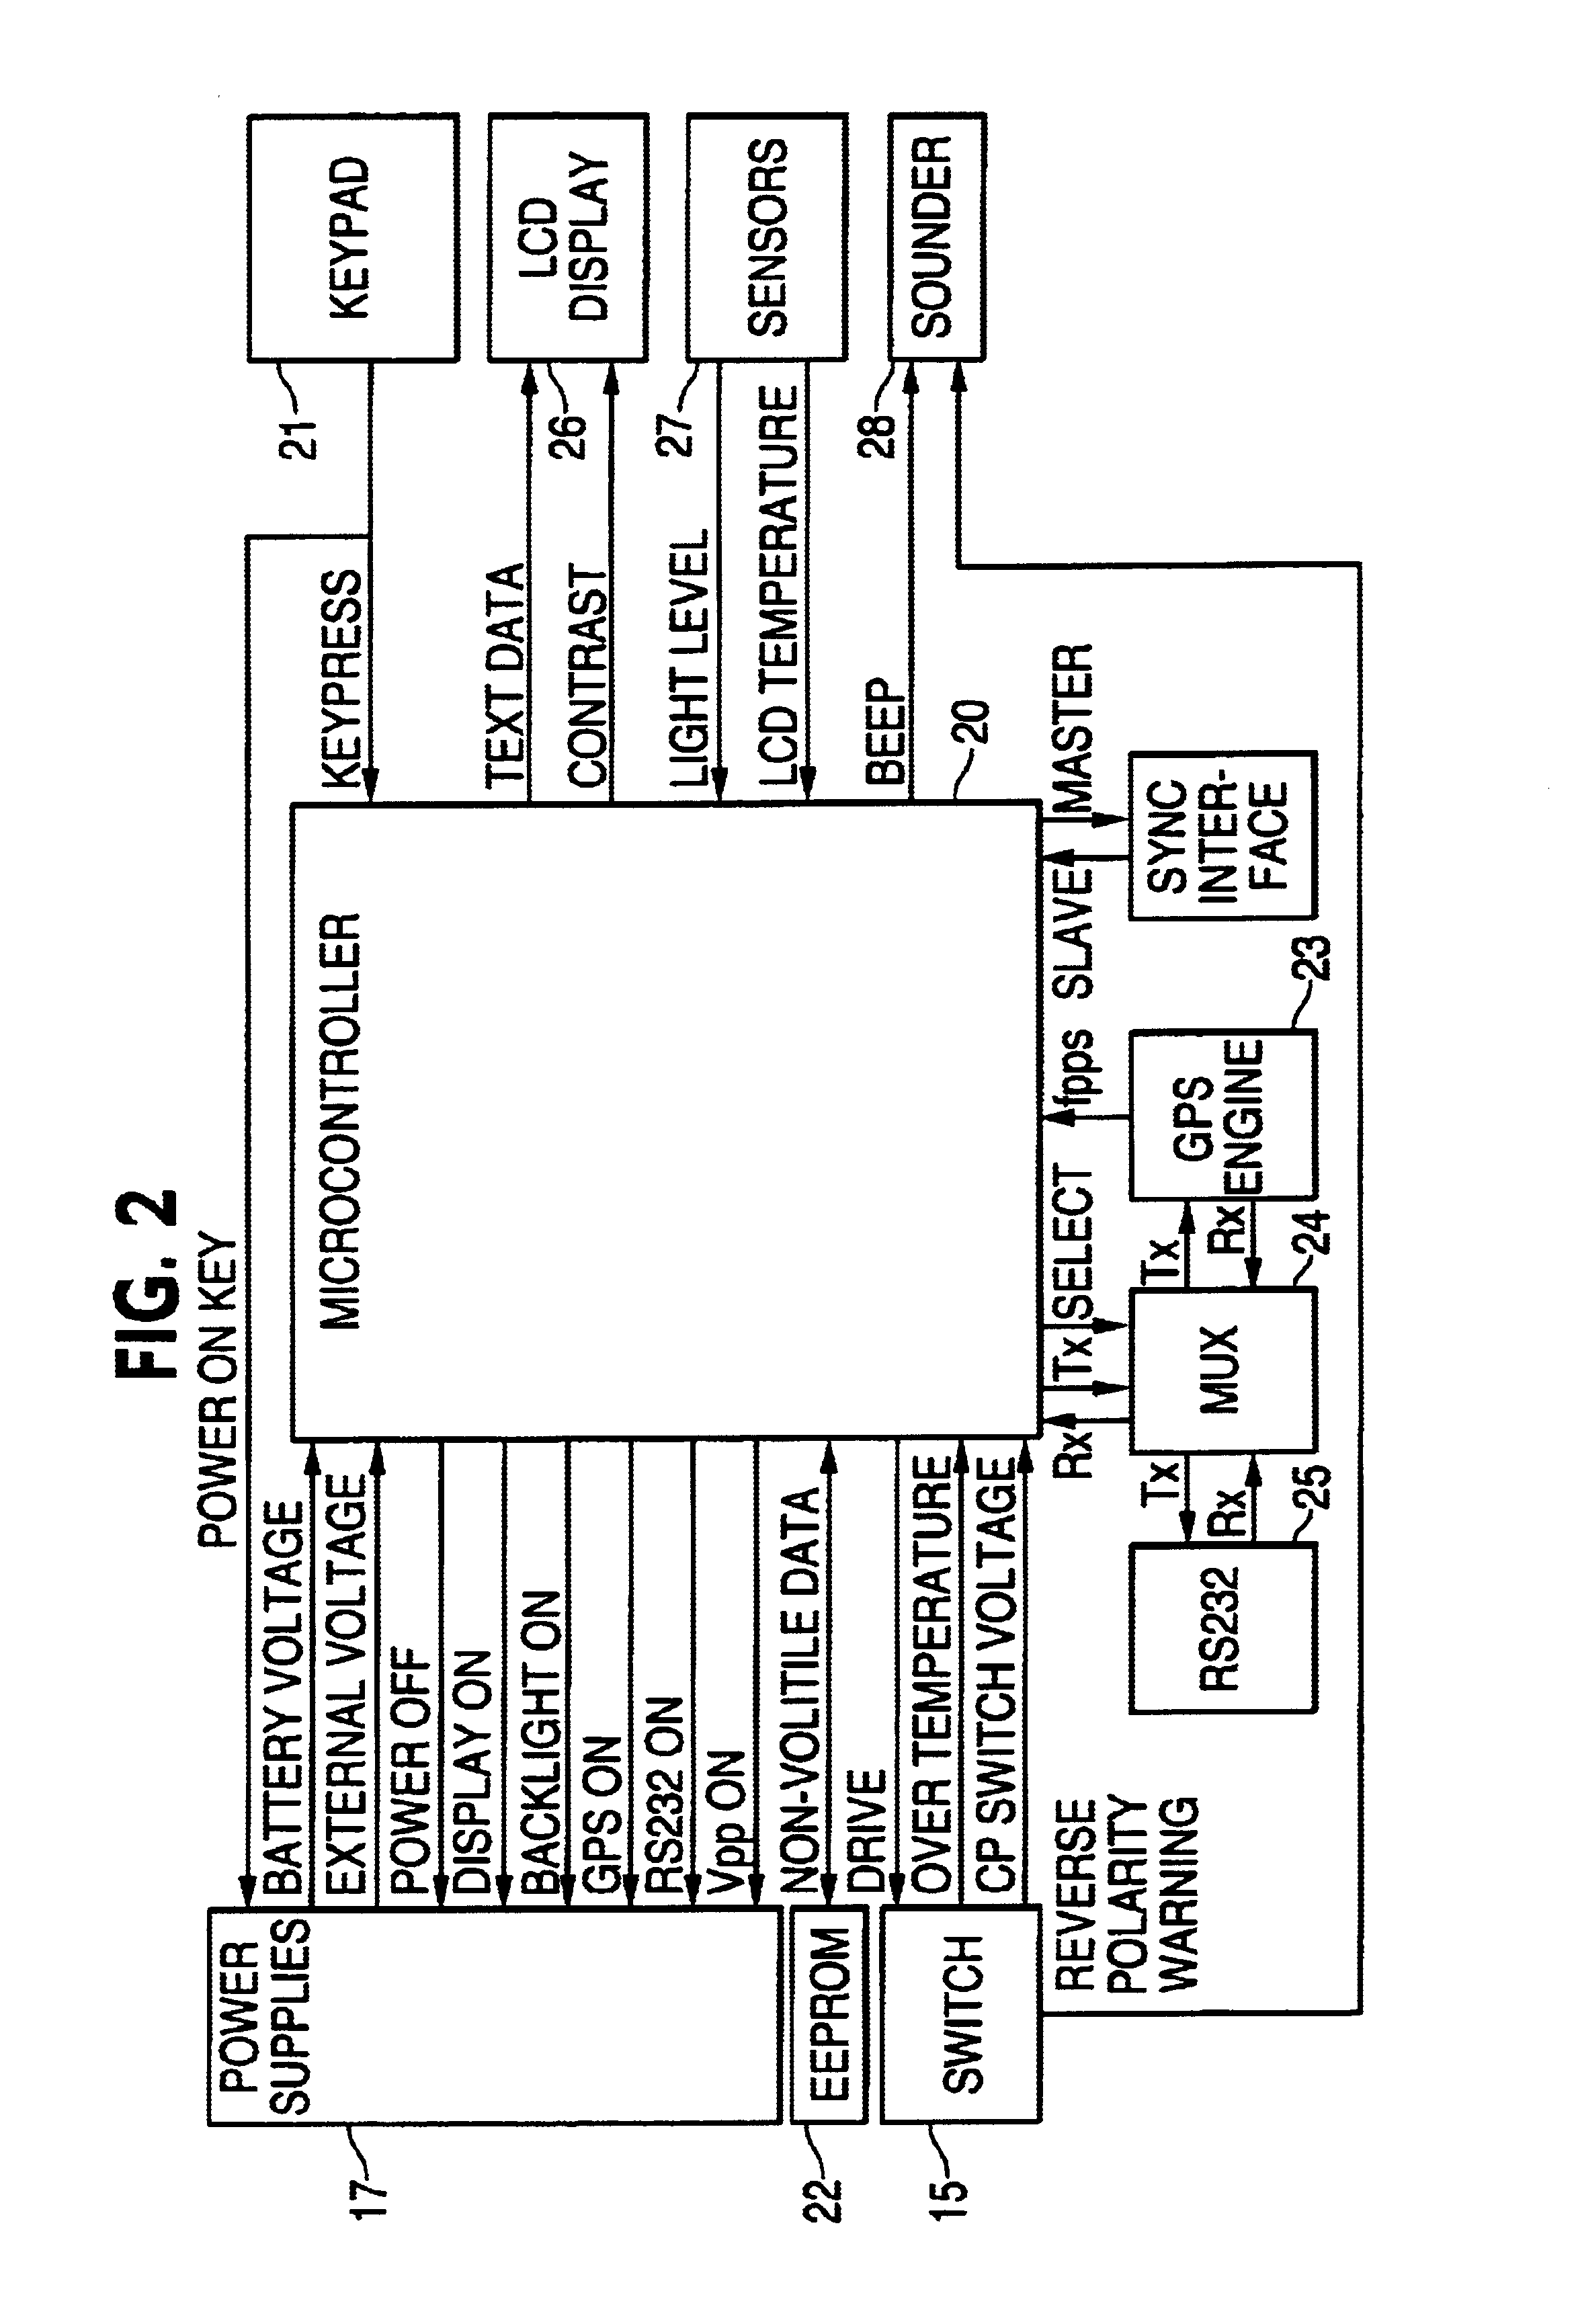 Pipeline mapping and interrupter therefor